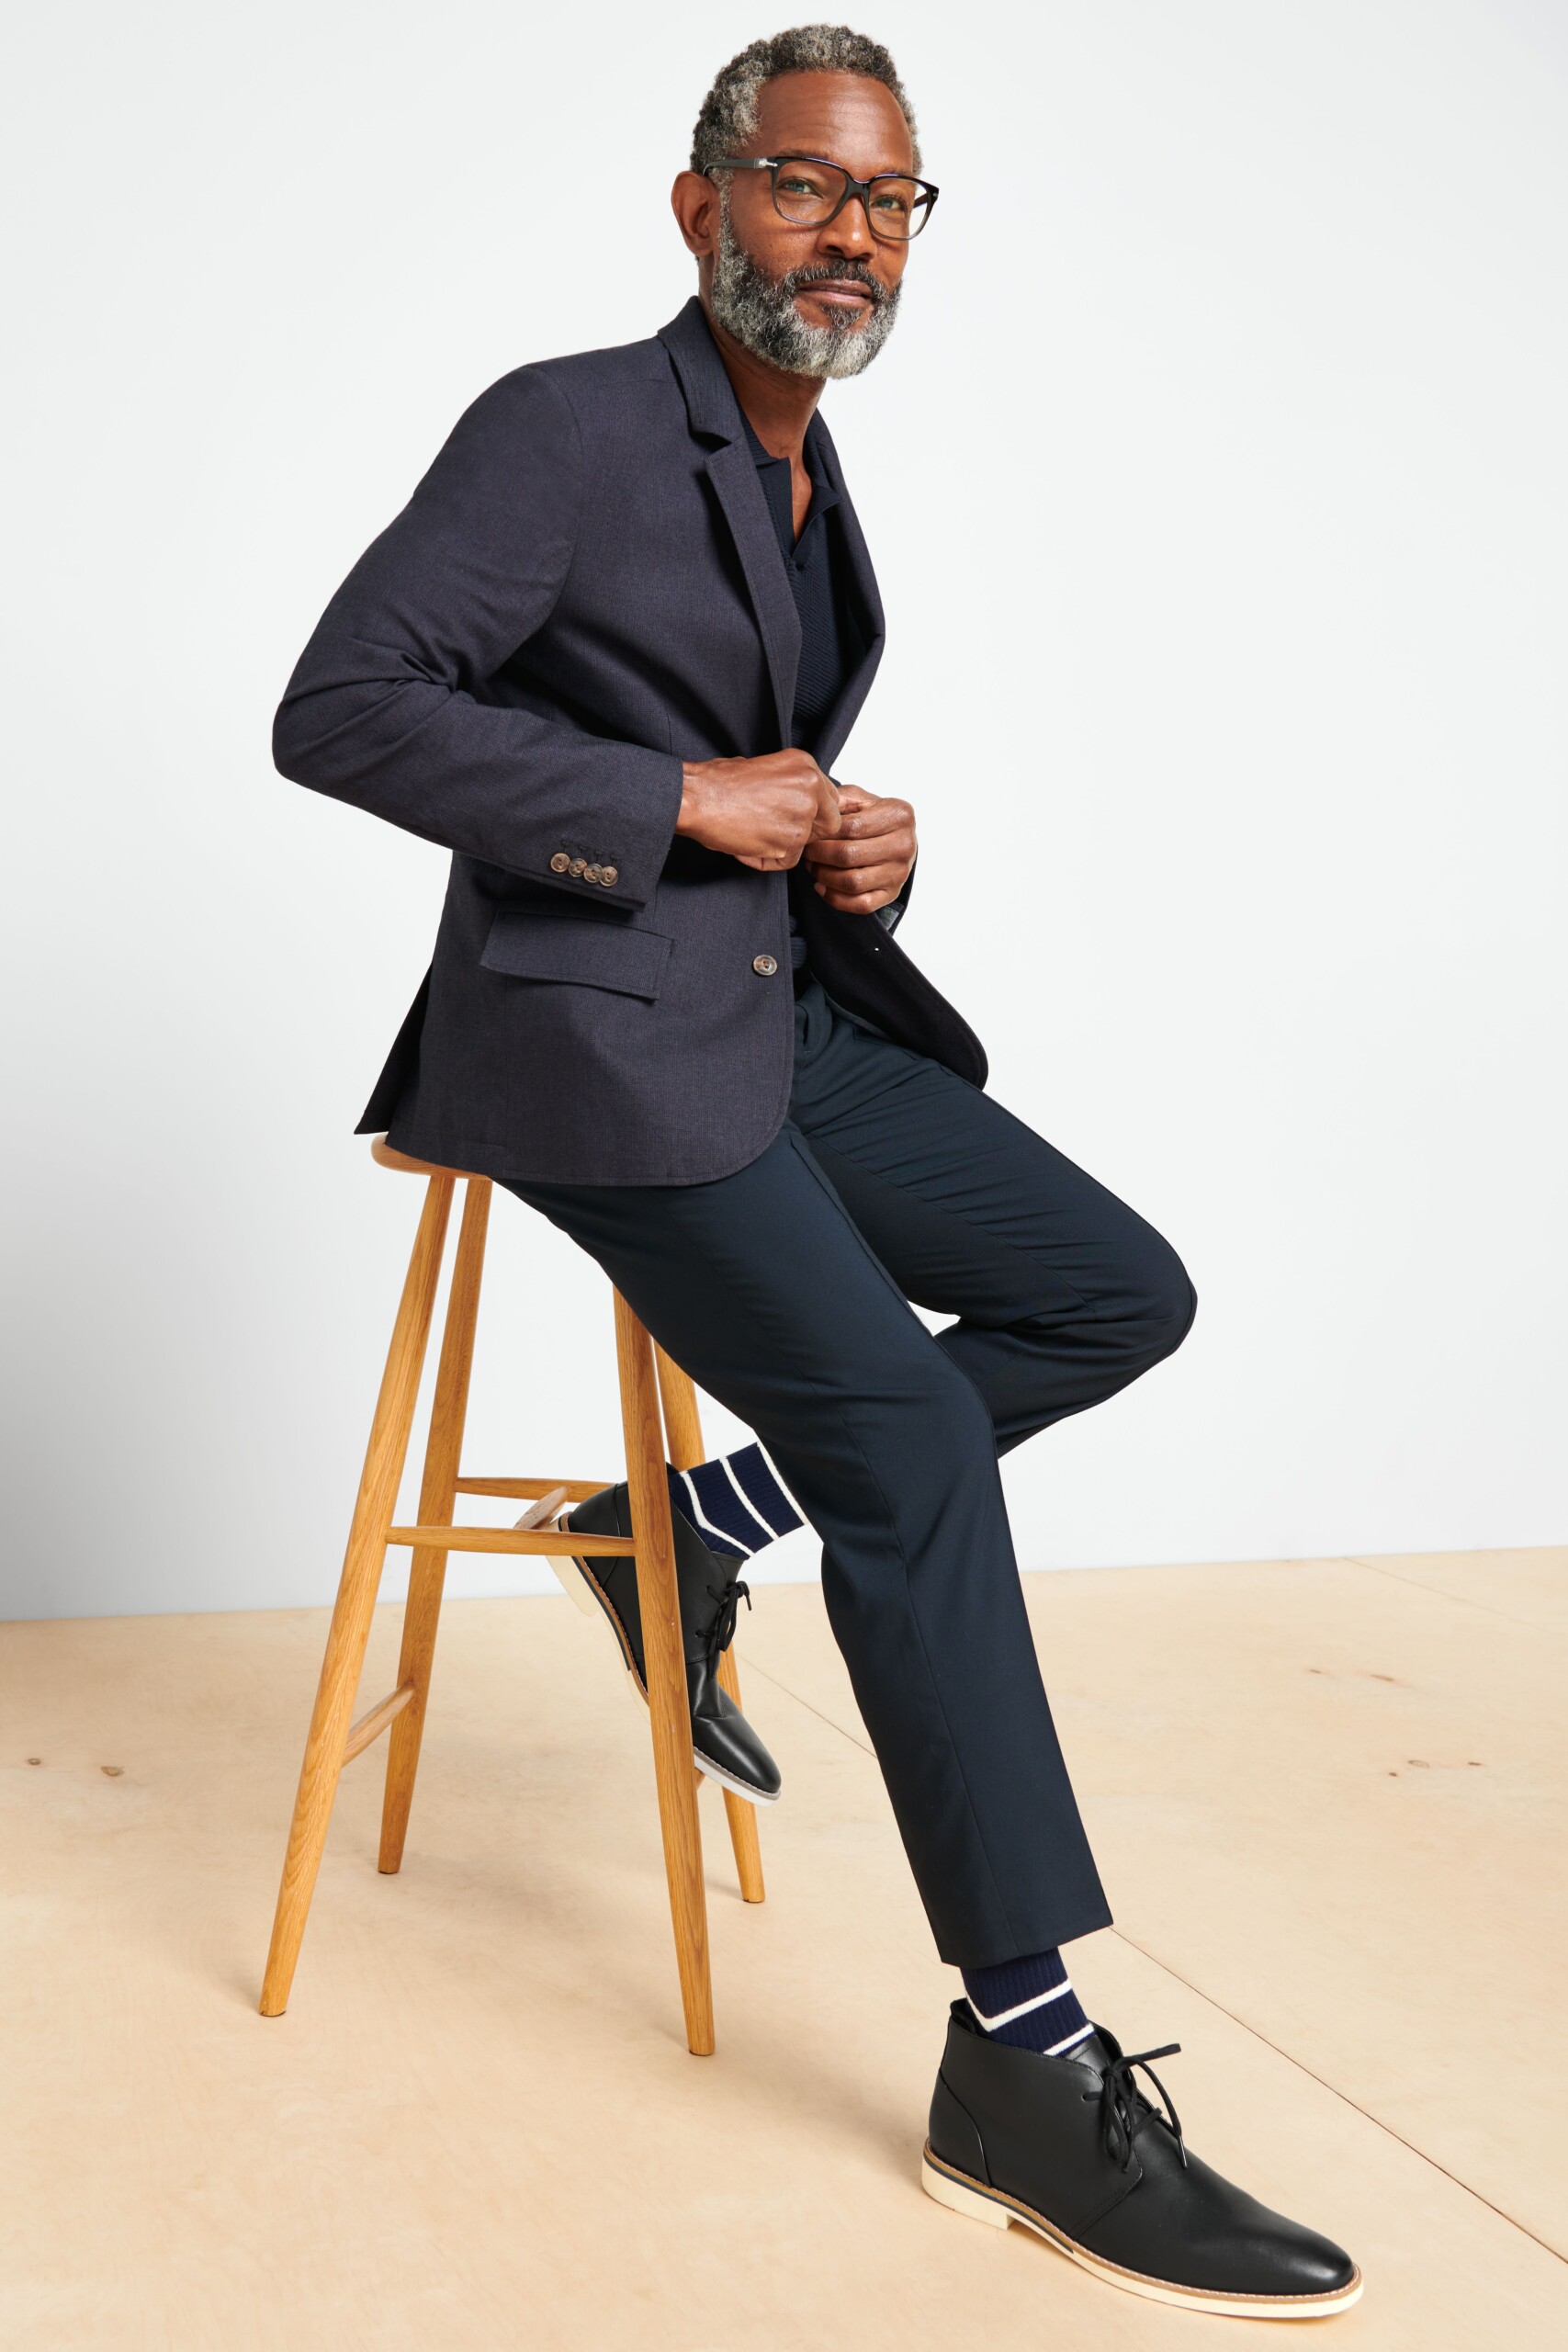 Stitch Fix model wearing men’s graduation outfit featuring a navy suit jacket, navy pants, striped socks and black dress shoes.